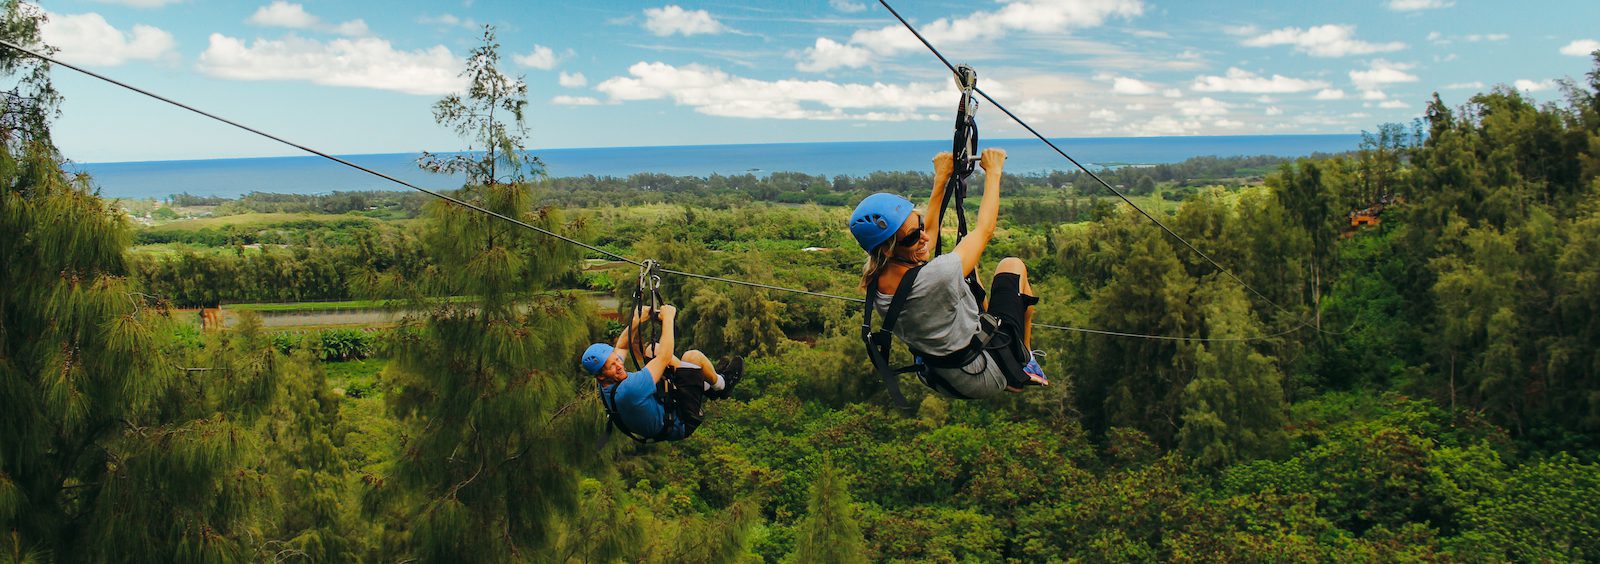 What to Expect When You Go Ziplining on Oahu for the First Time